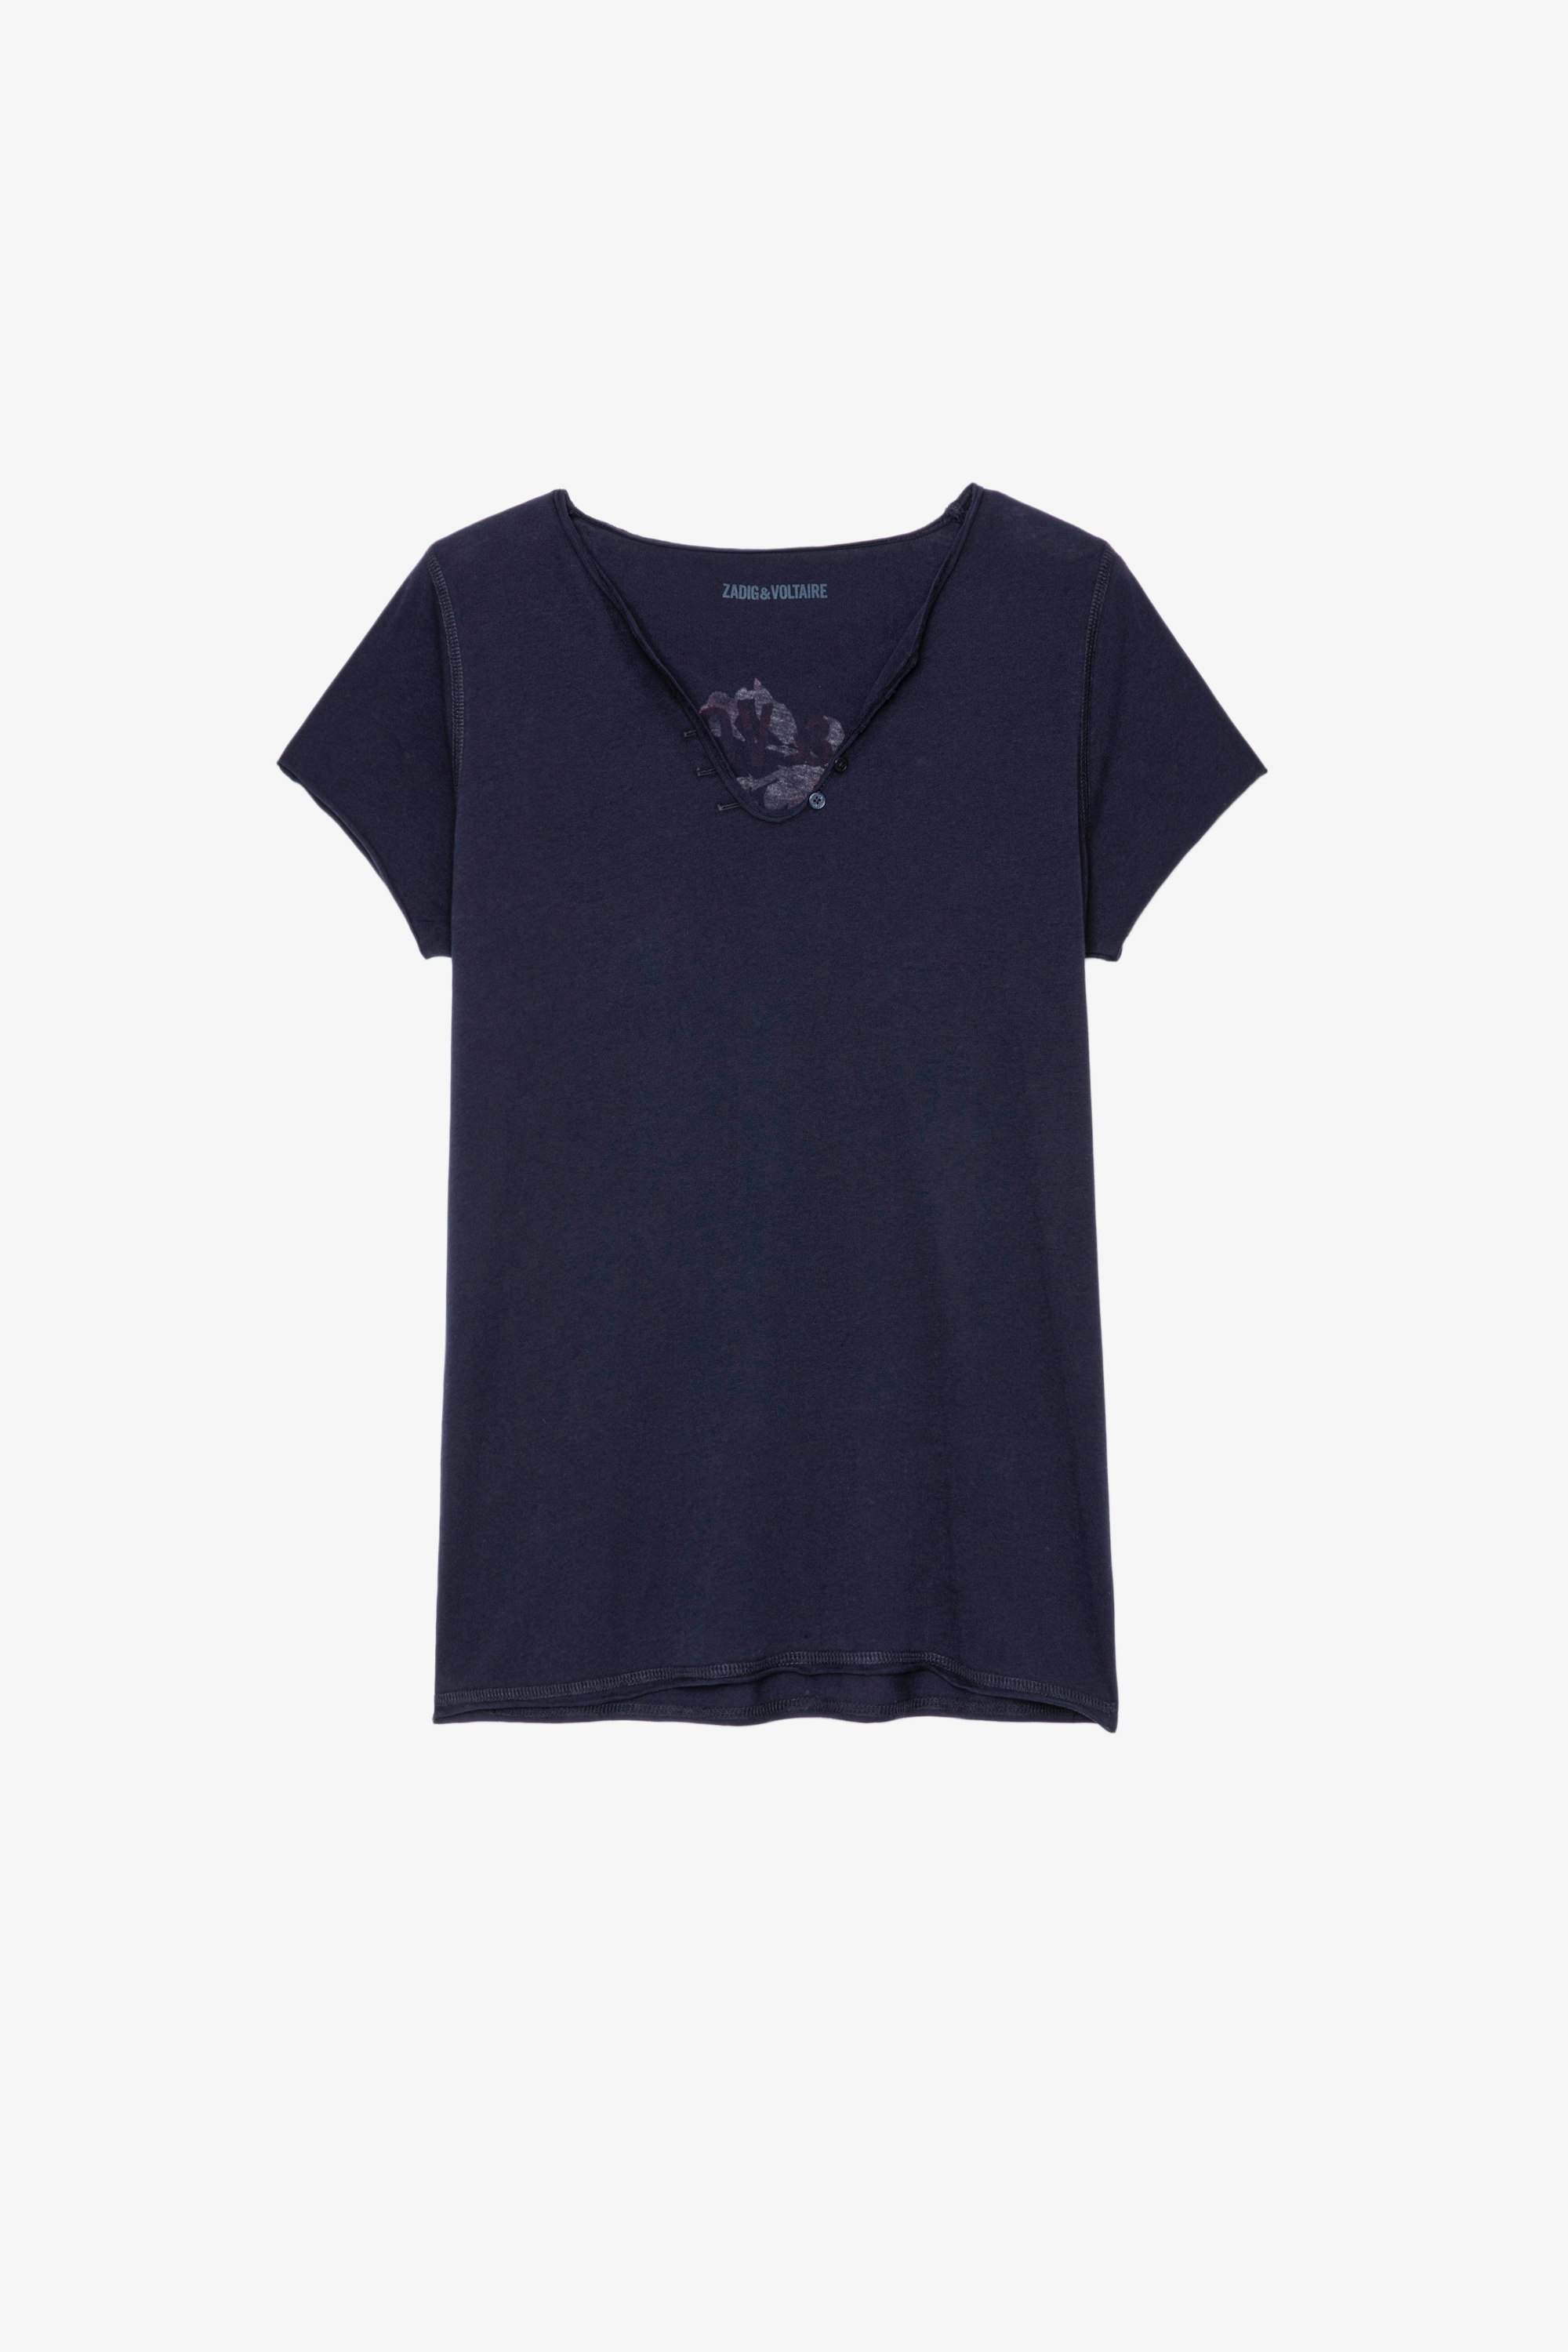 Blason Henley T-shirt Women’s navy blue cotton Henley T-shirt with badge and crystals on the back